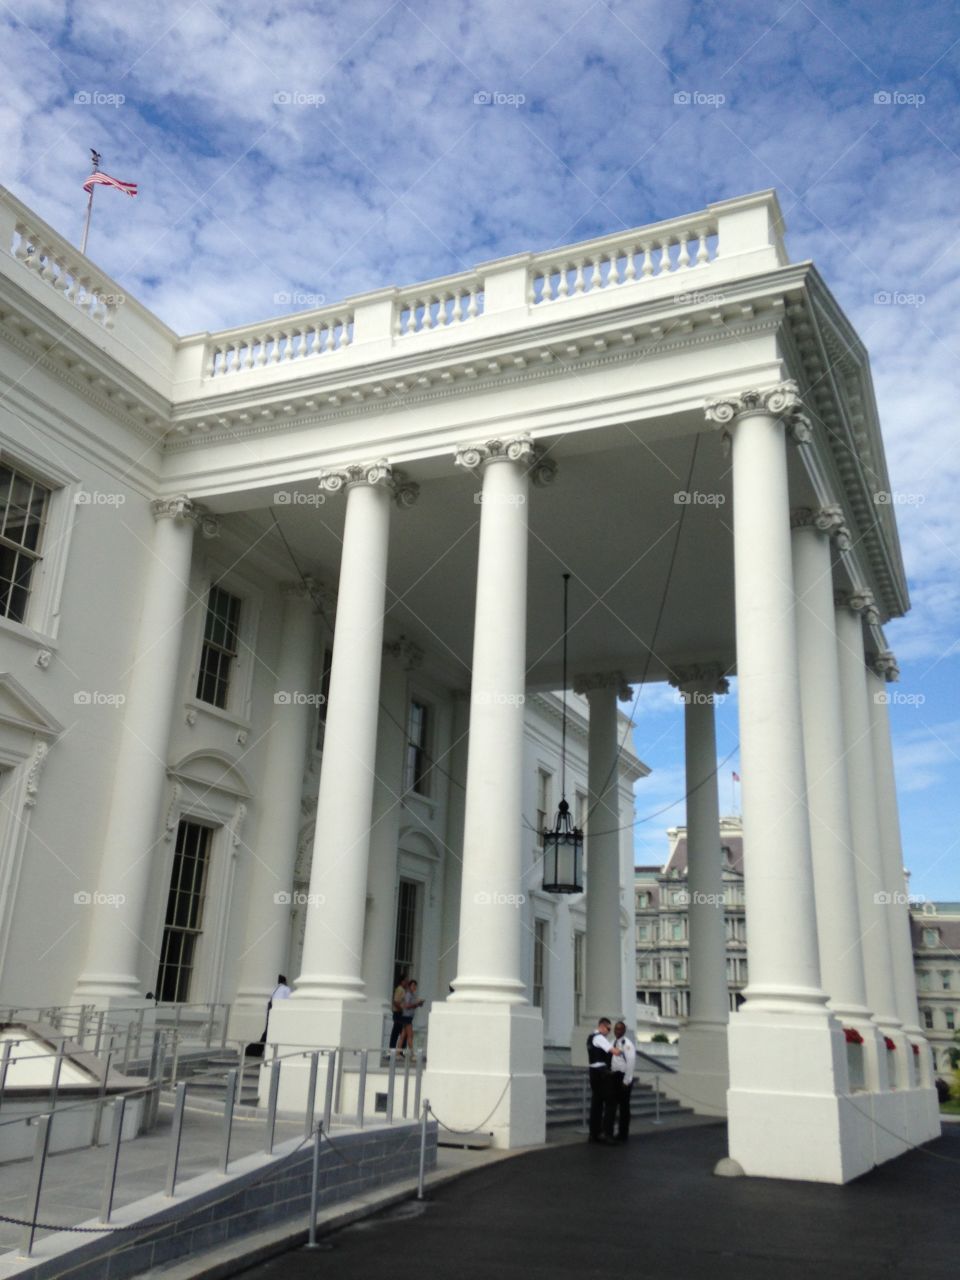 Side shot of the front of the White House. A Truly majestic peace of architecture. With a beautiful sky to covet it all. 